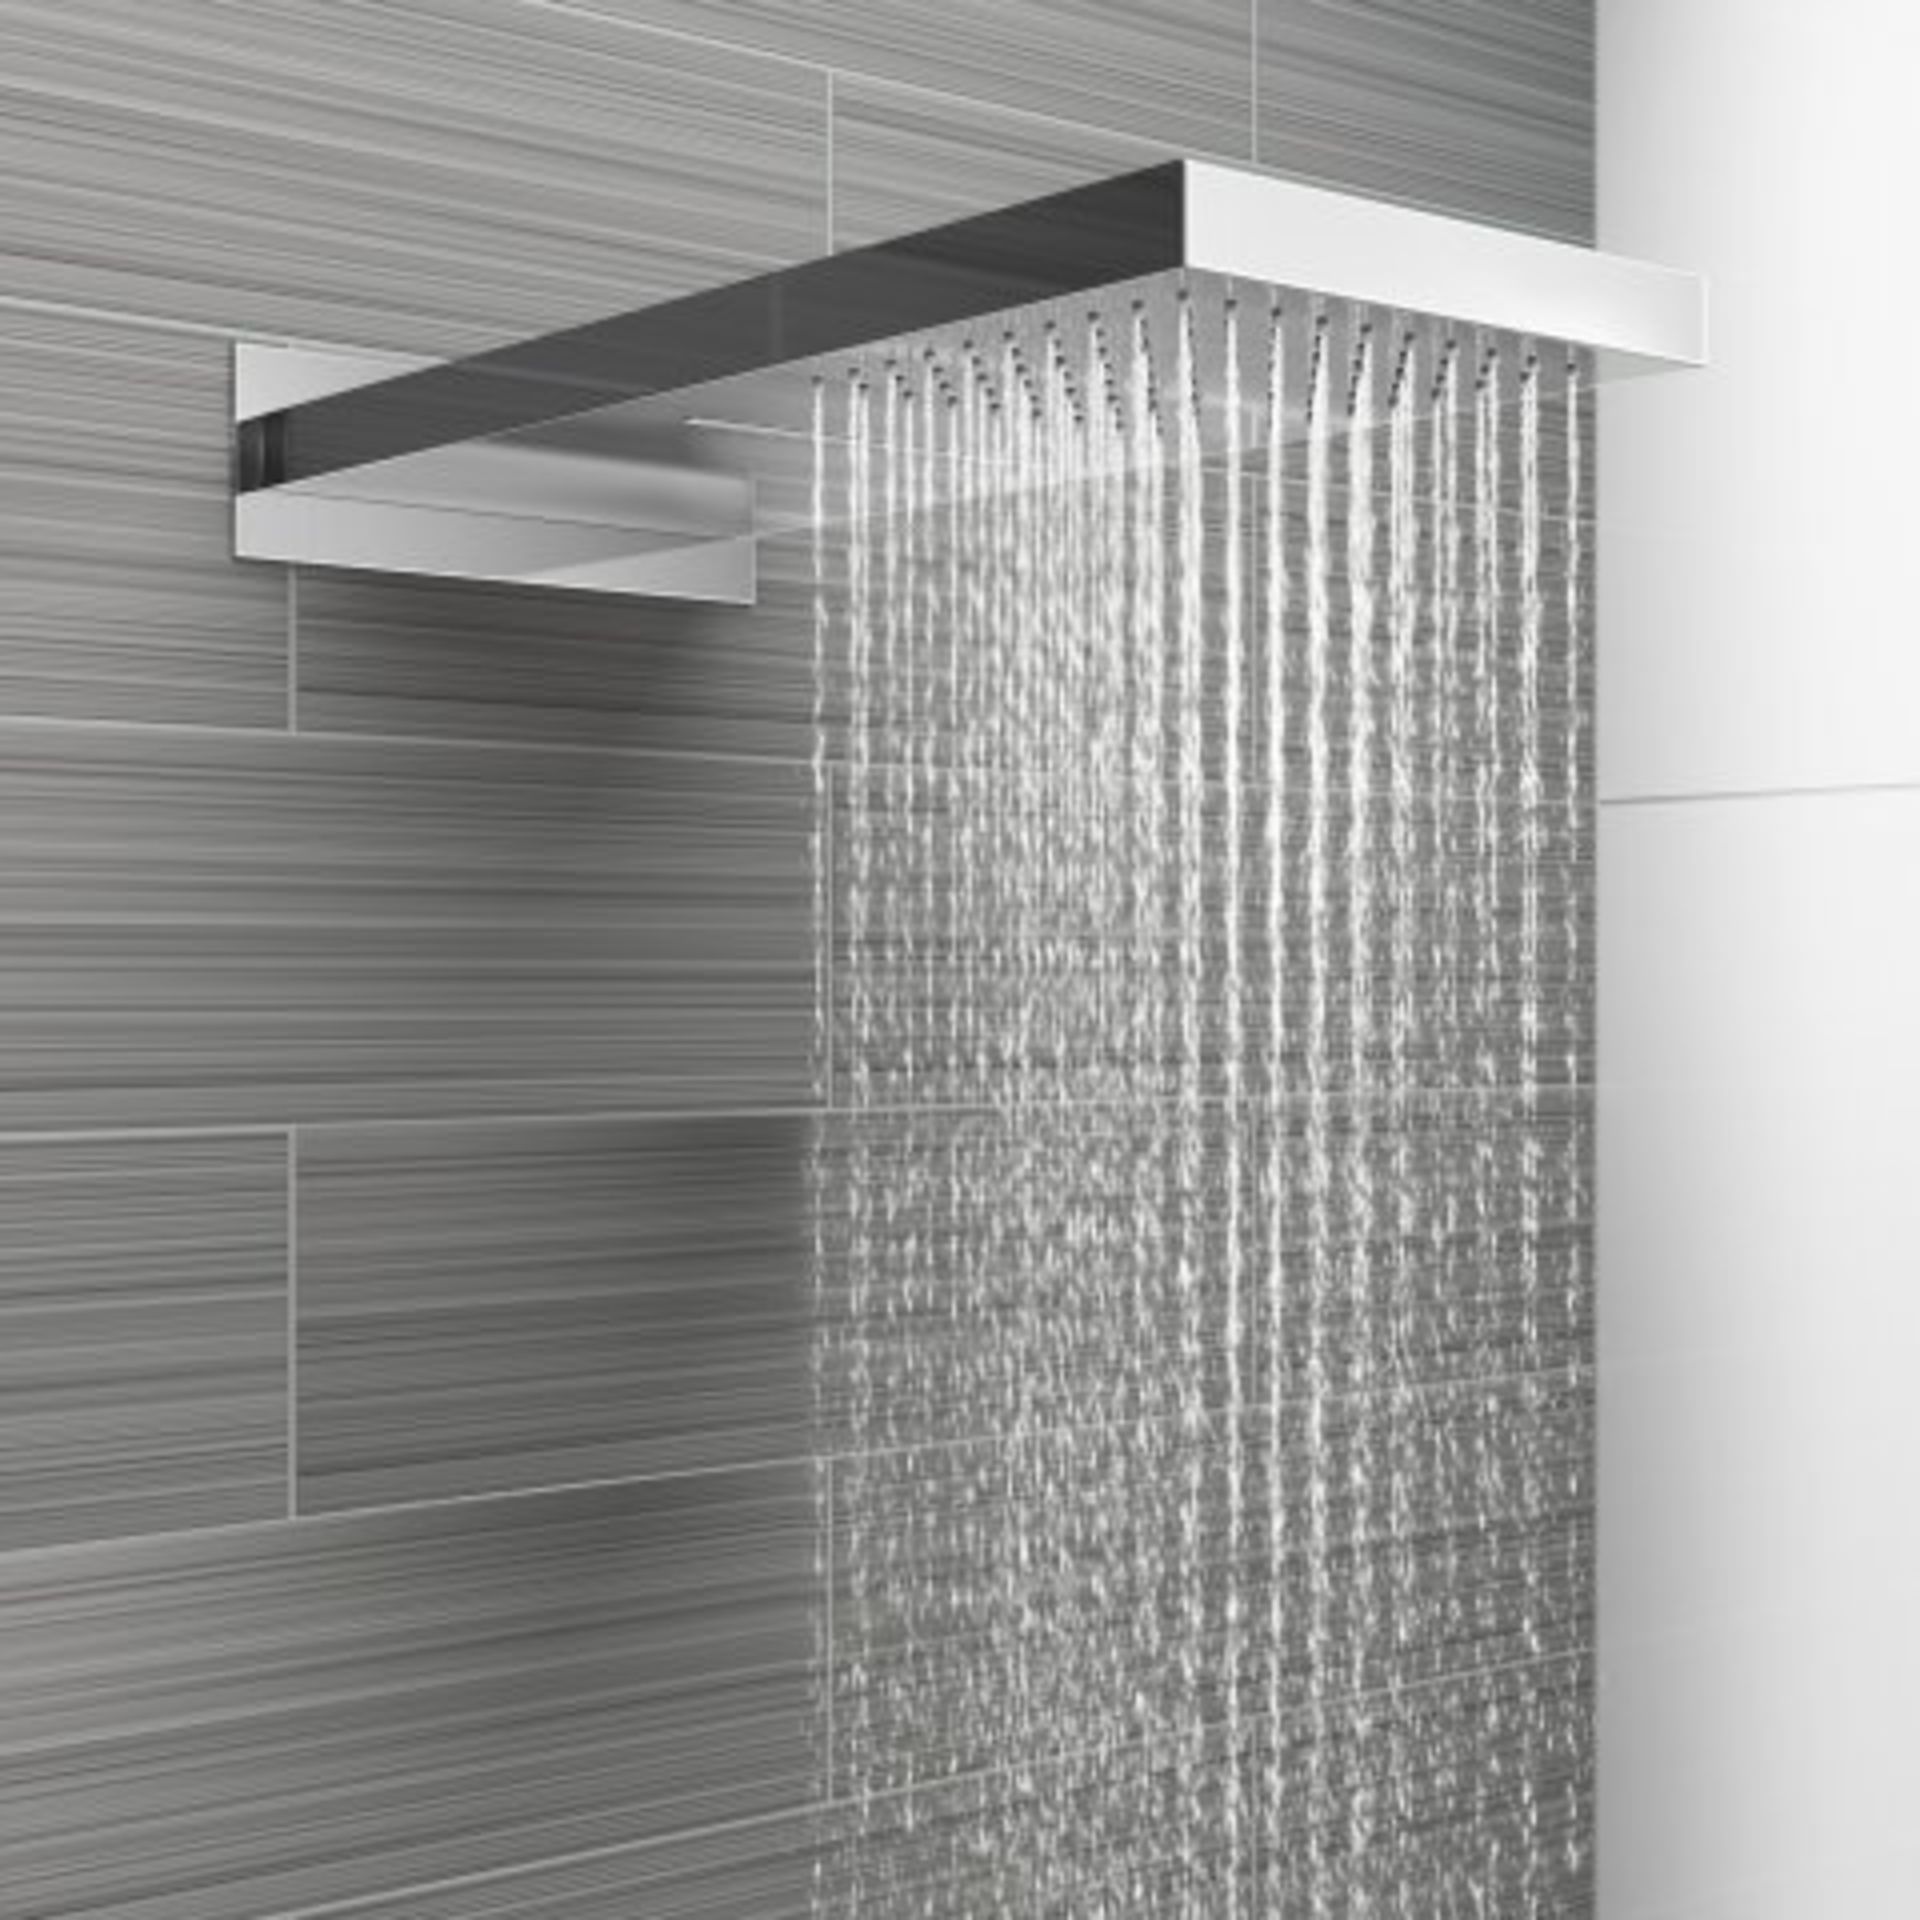 (H32) Stainless Steel 200x500mm Waterfall Shower Head RRP £374.99 "What An Experience": Enjoy - Image 3 of 6